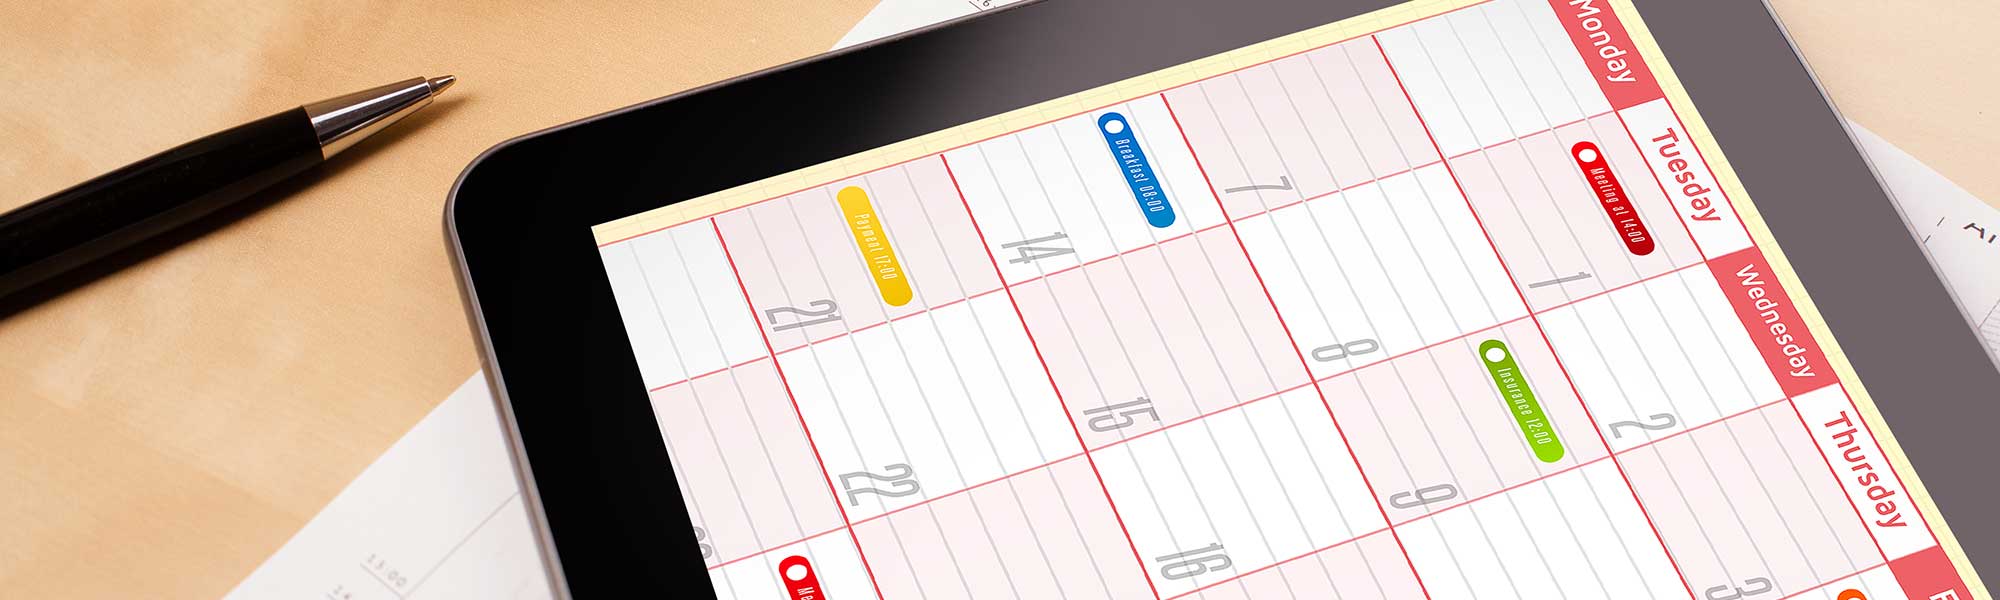 A tablet showing the calendar